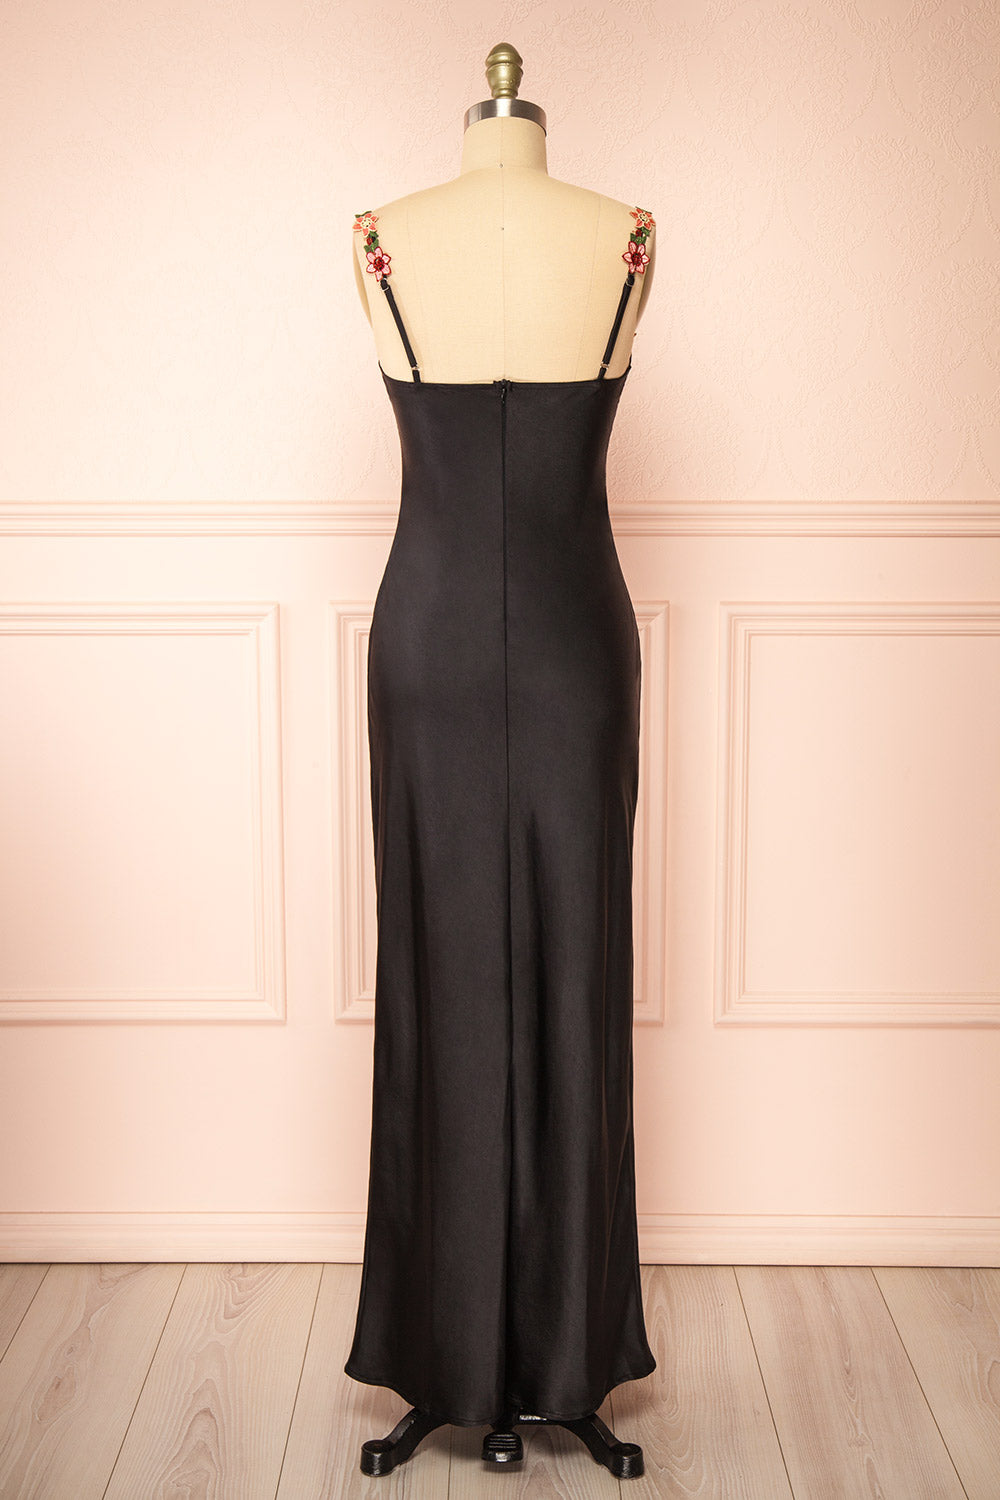 Ramona Black Slip Dress w/ Floral Embroidery | Boutique 1861 back view